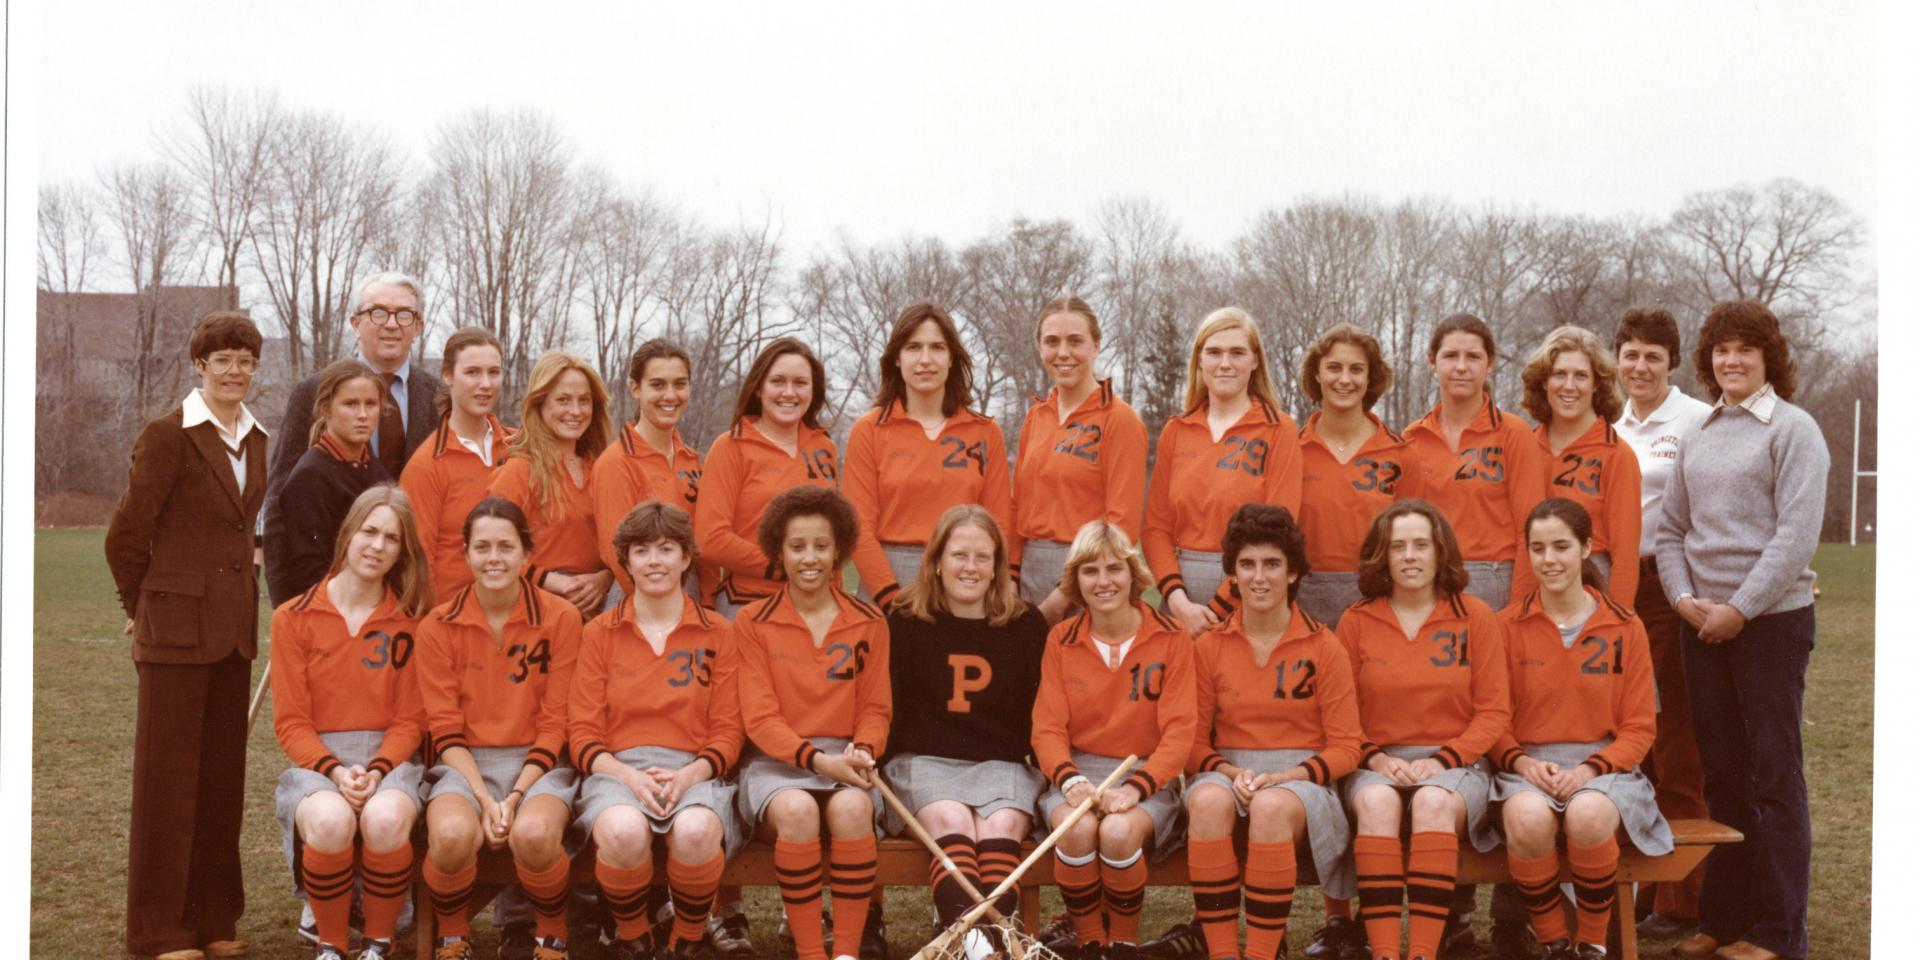 Photo of early women's sports team